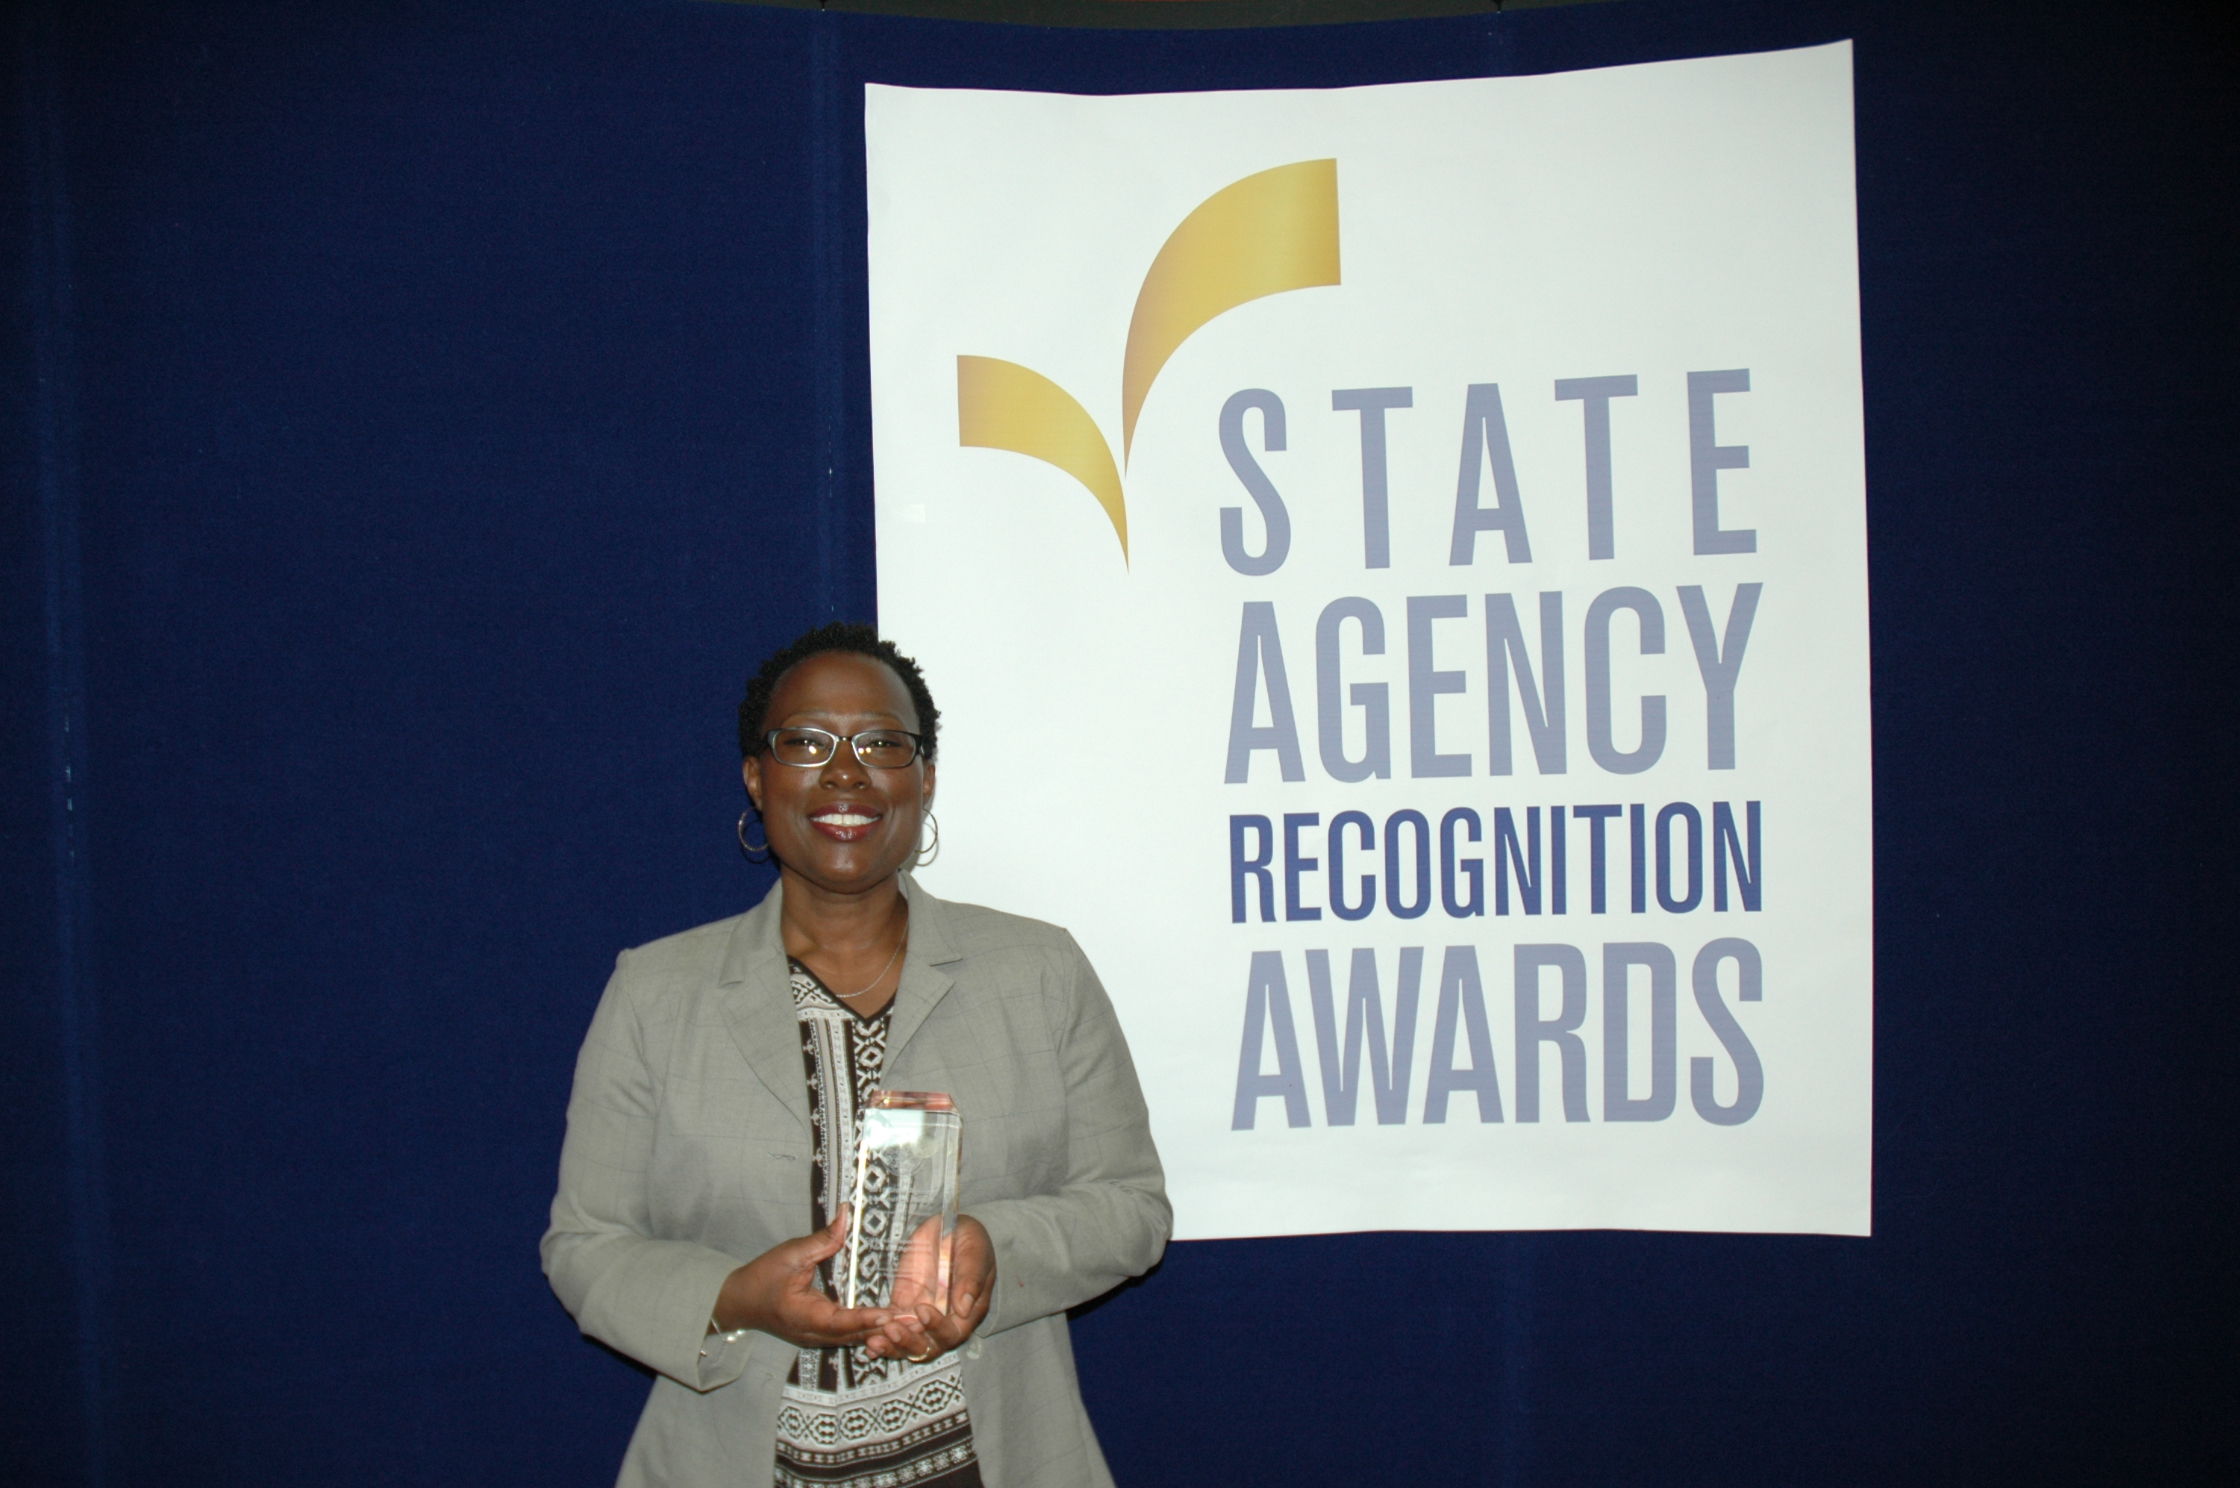 Pamela Sherron accepts the most improved DVBE participation award for the California Department of food and agriculture for the large agency category